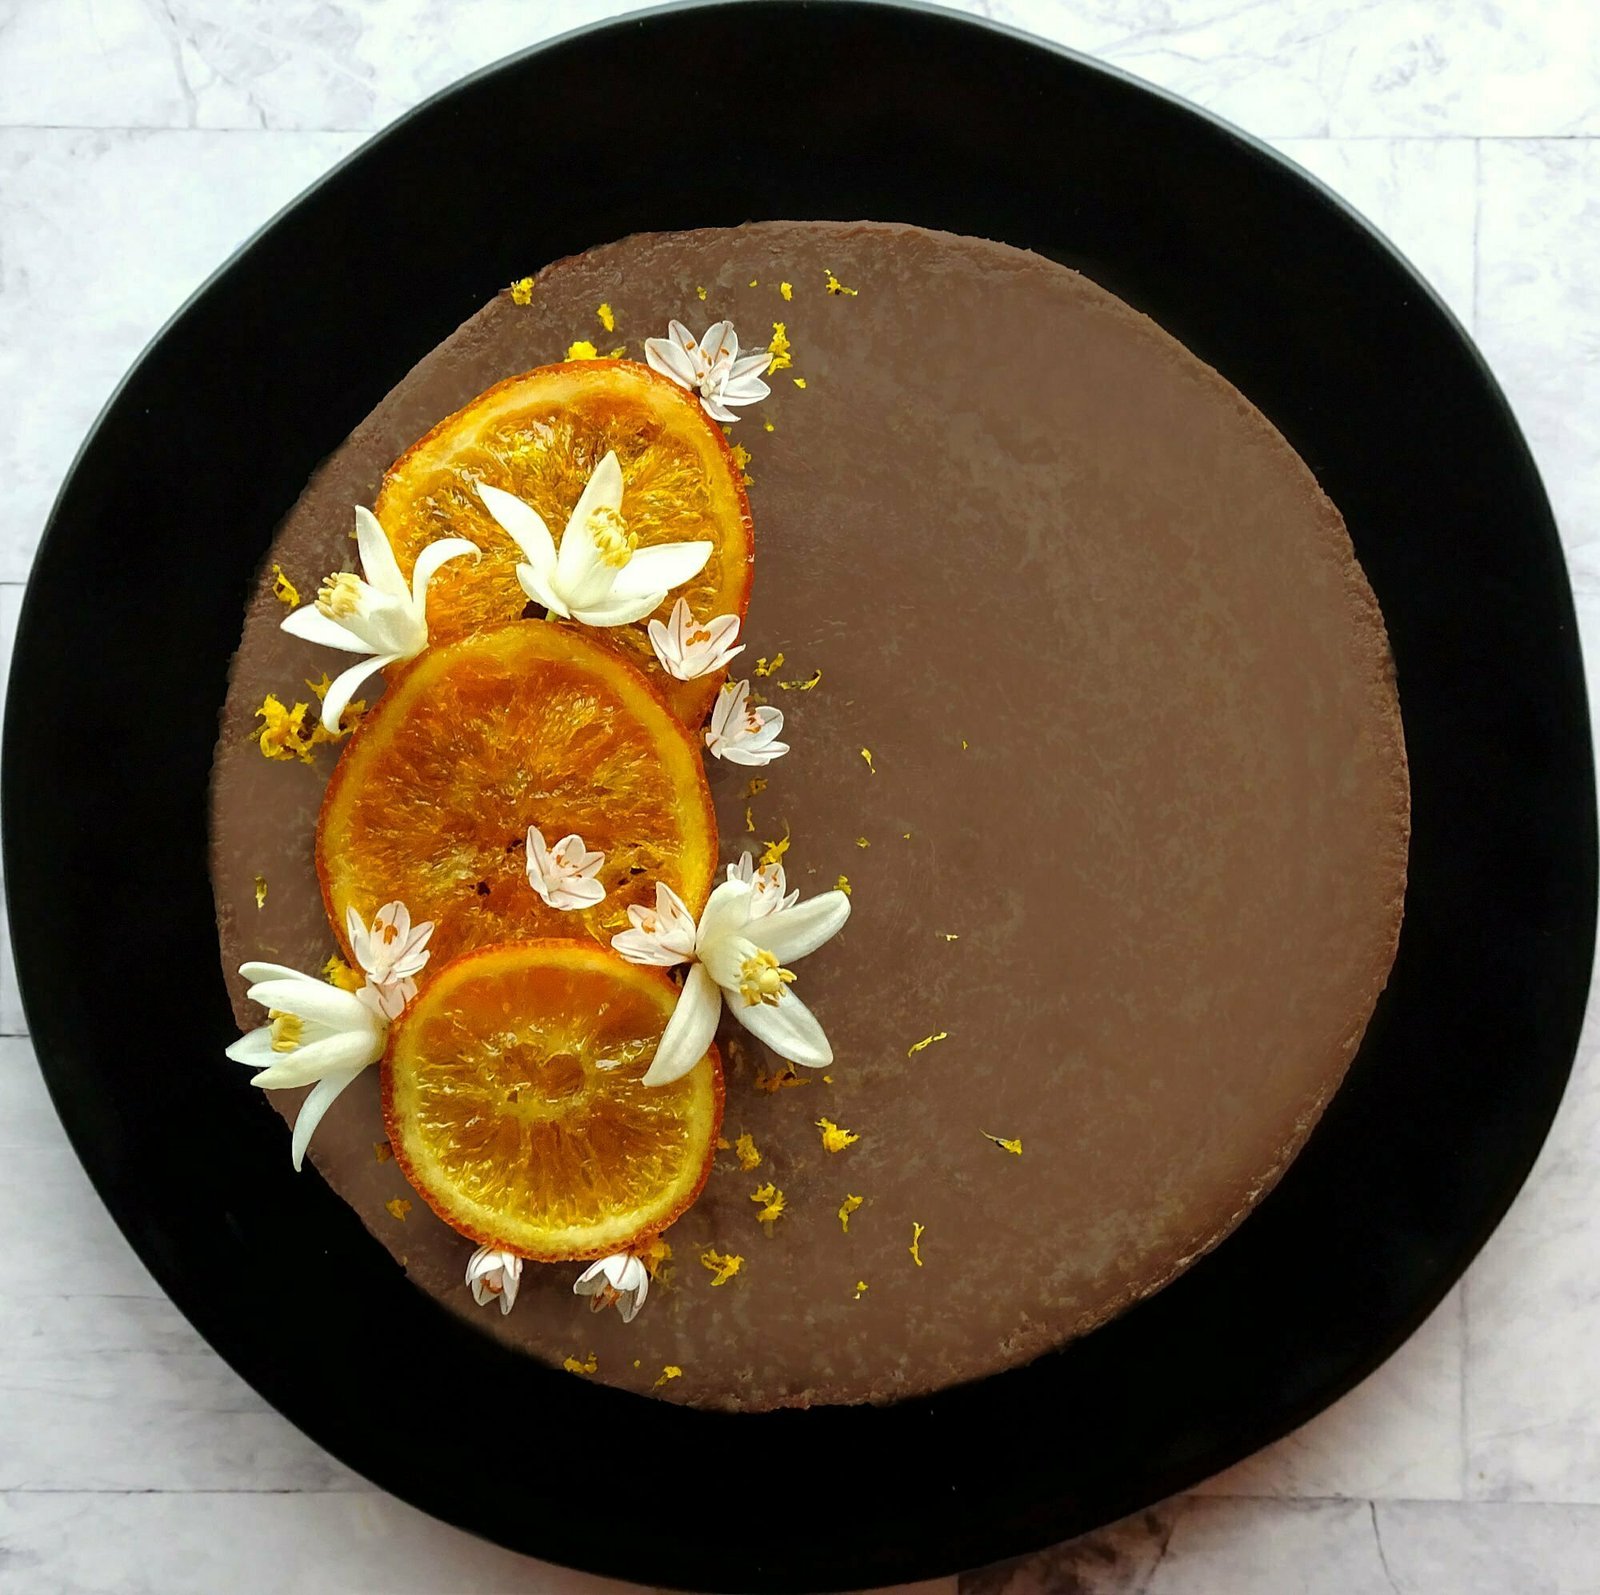 baked orange chocolate cheesecake is garnished with candied orange slices and some orange blossoms